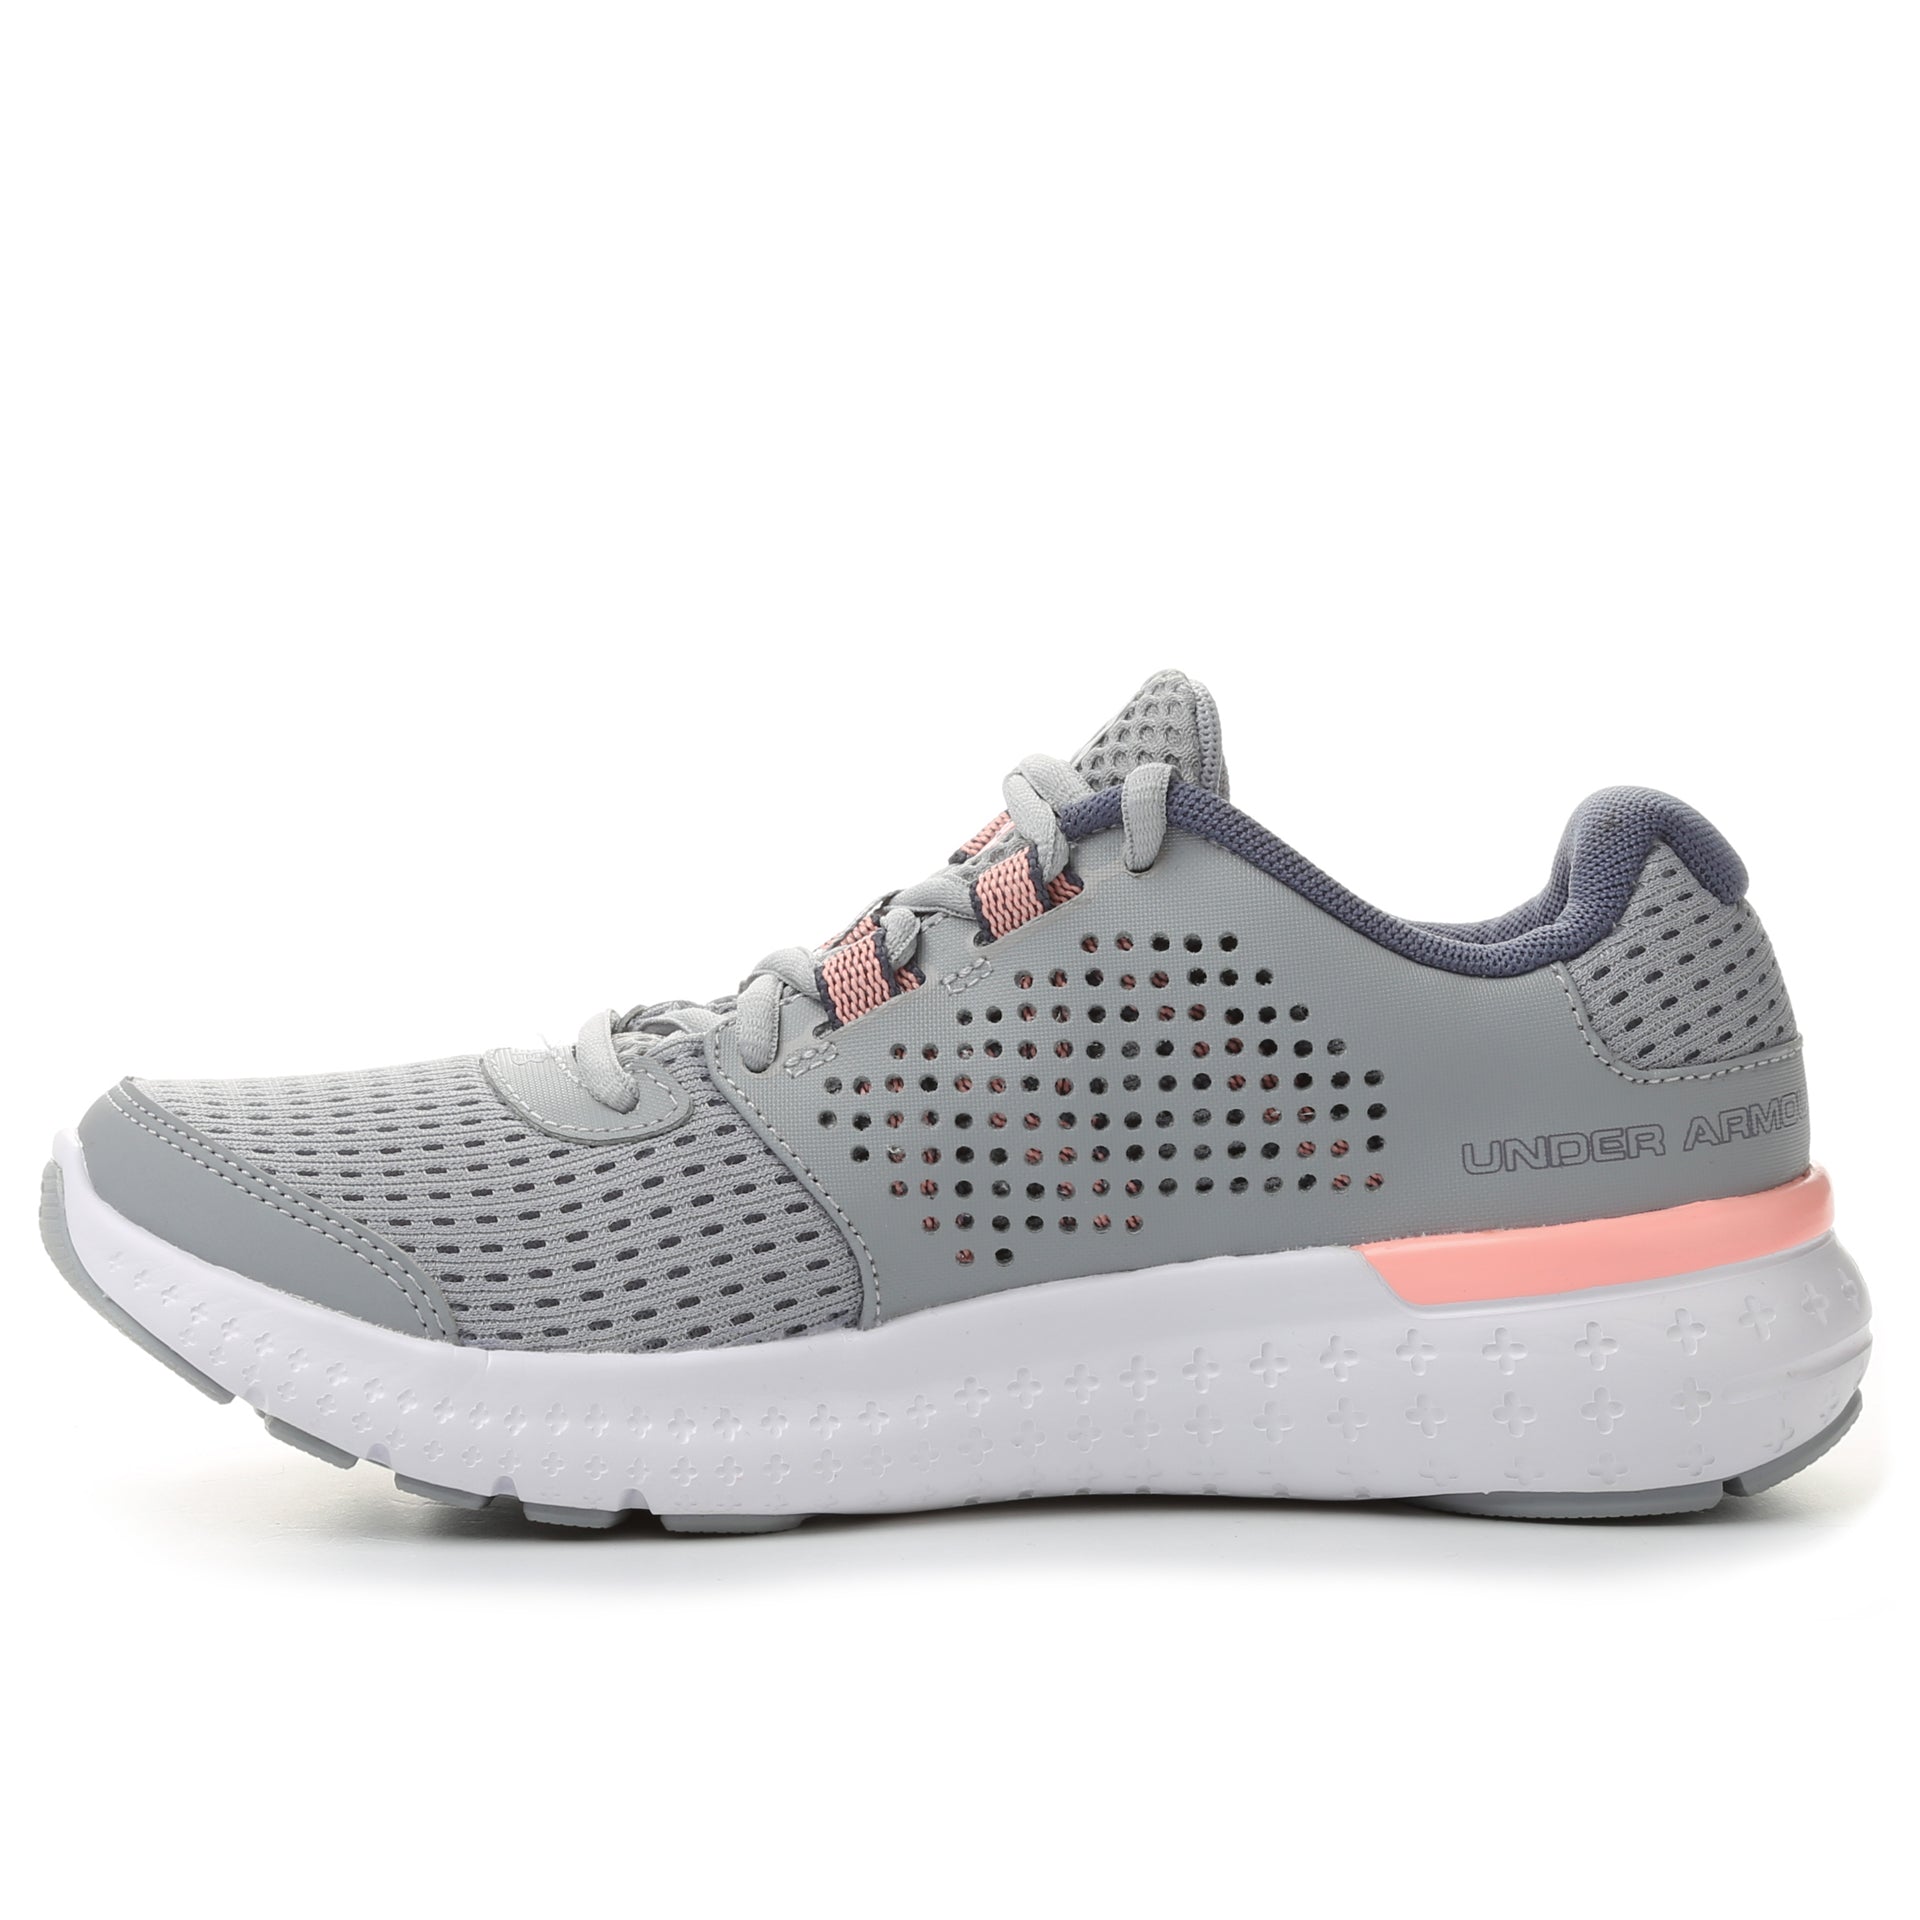 Under Armour Women's Micro G Fuel 